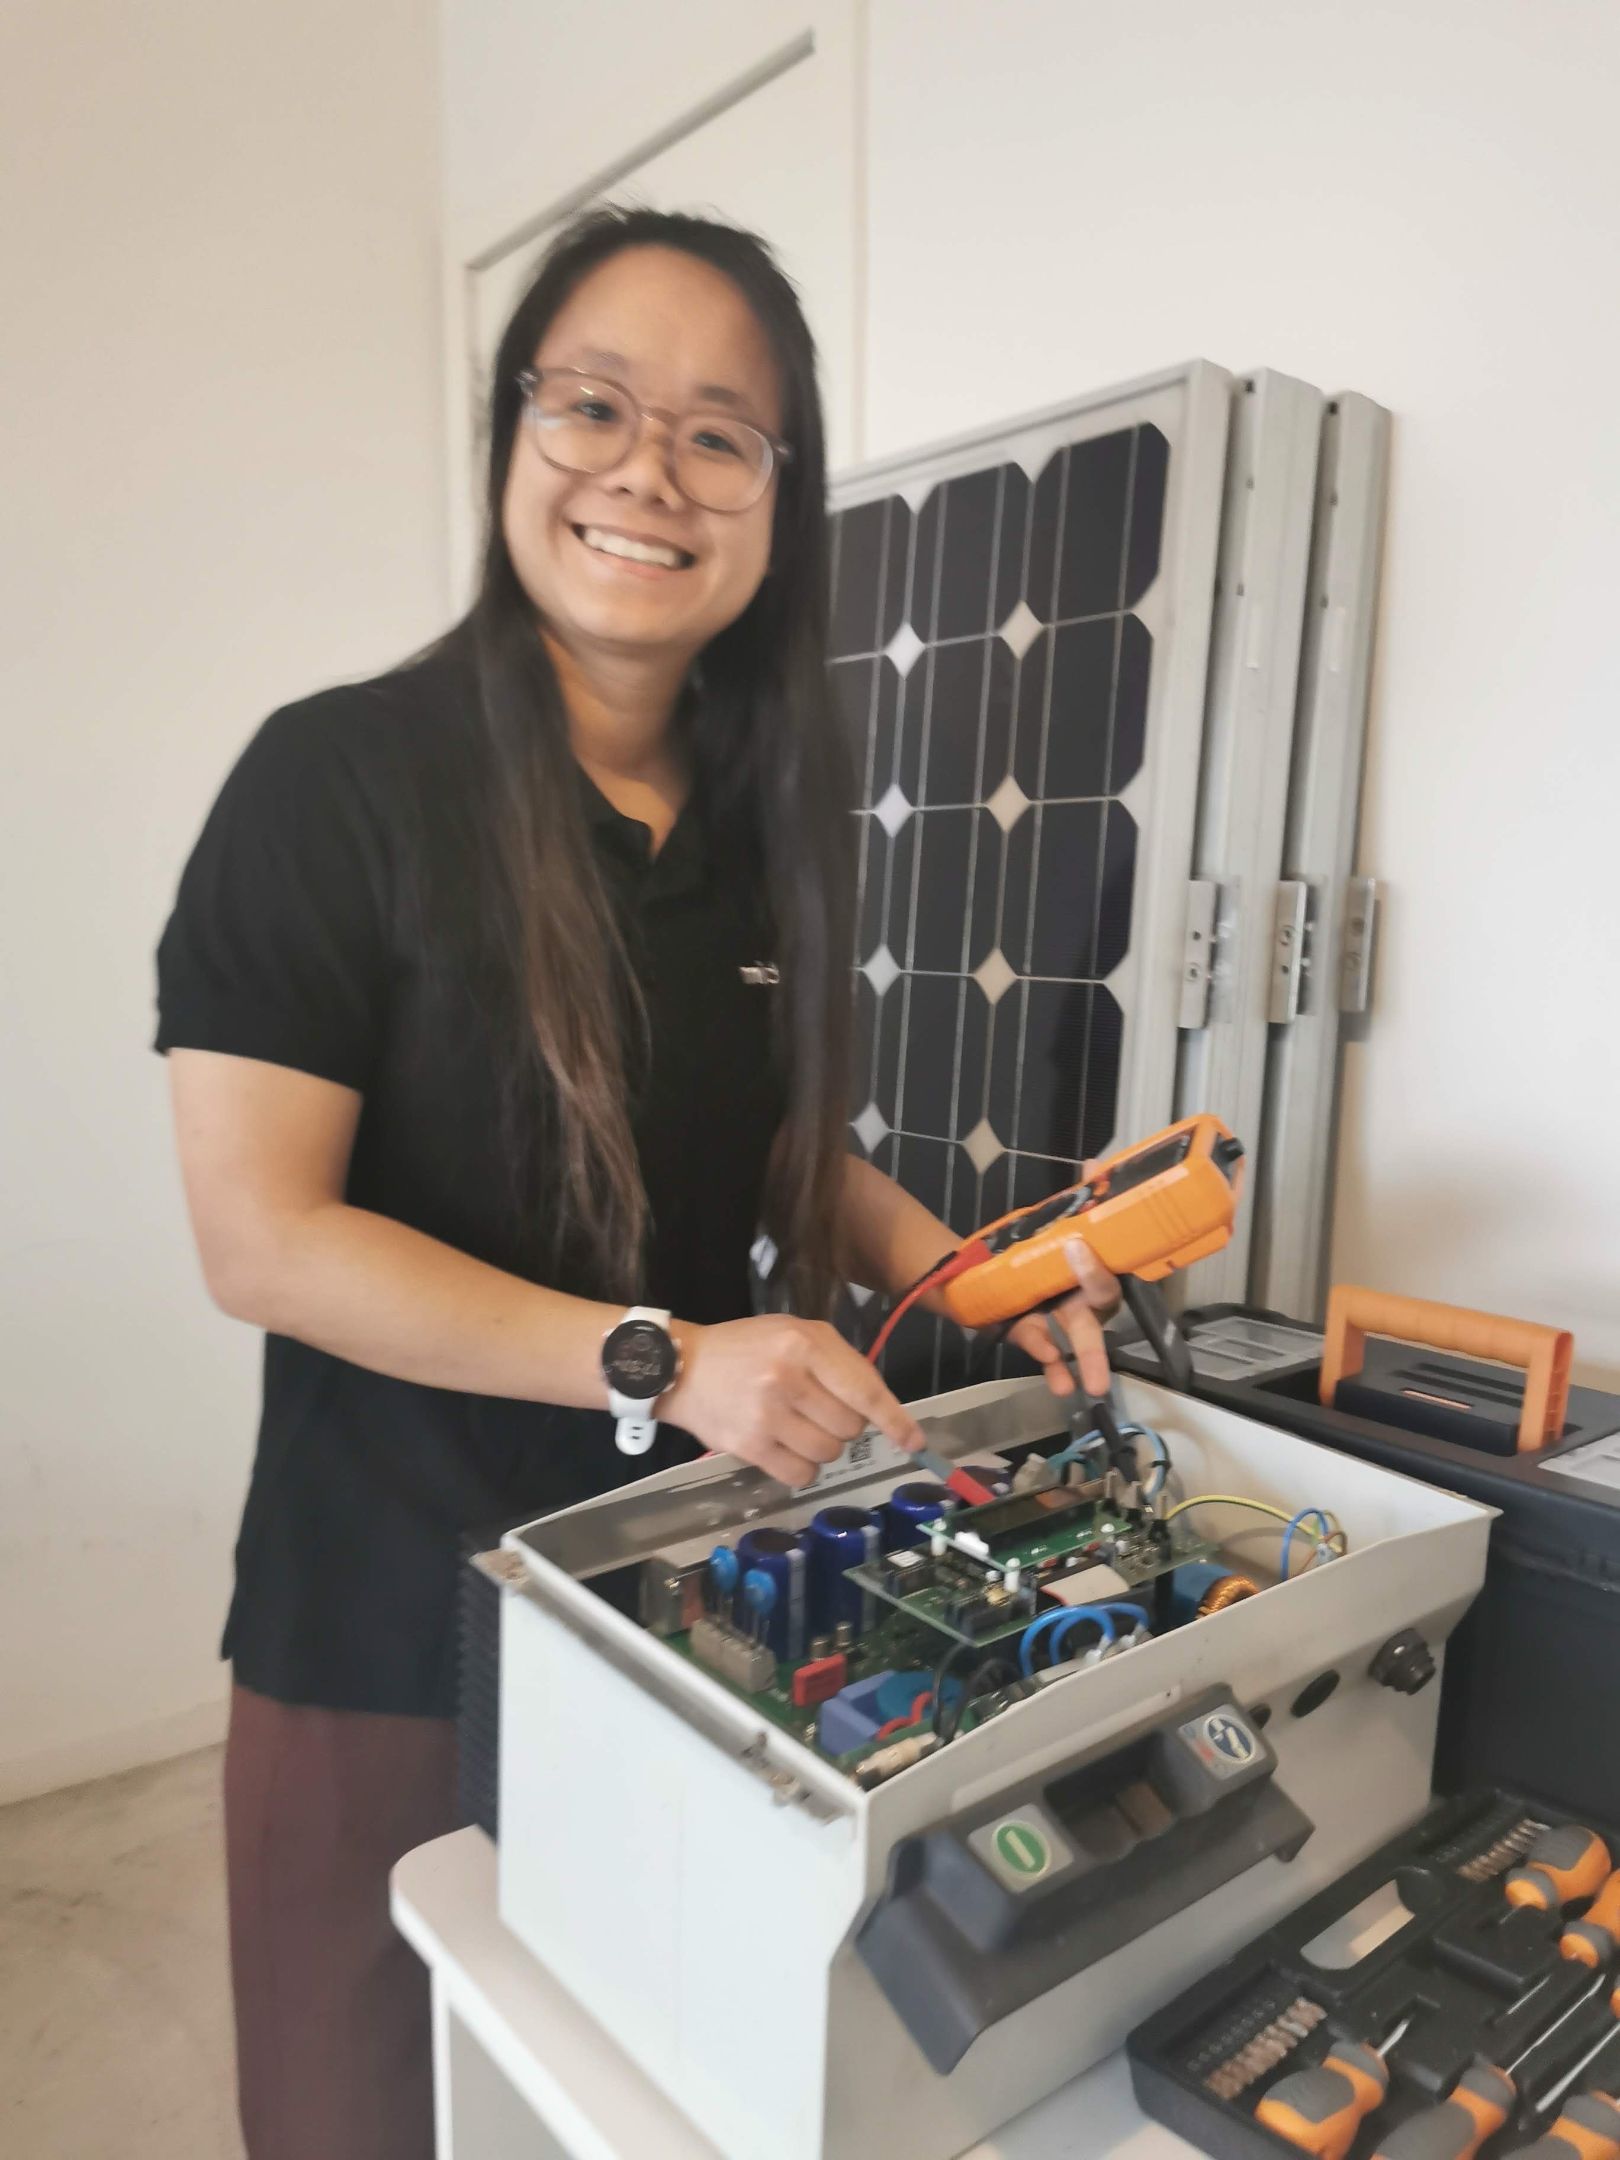 Amber Truong smiles as she works on solar panels in her garage